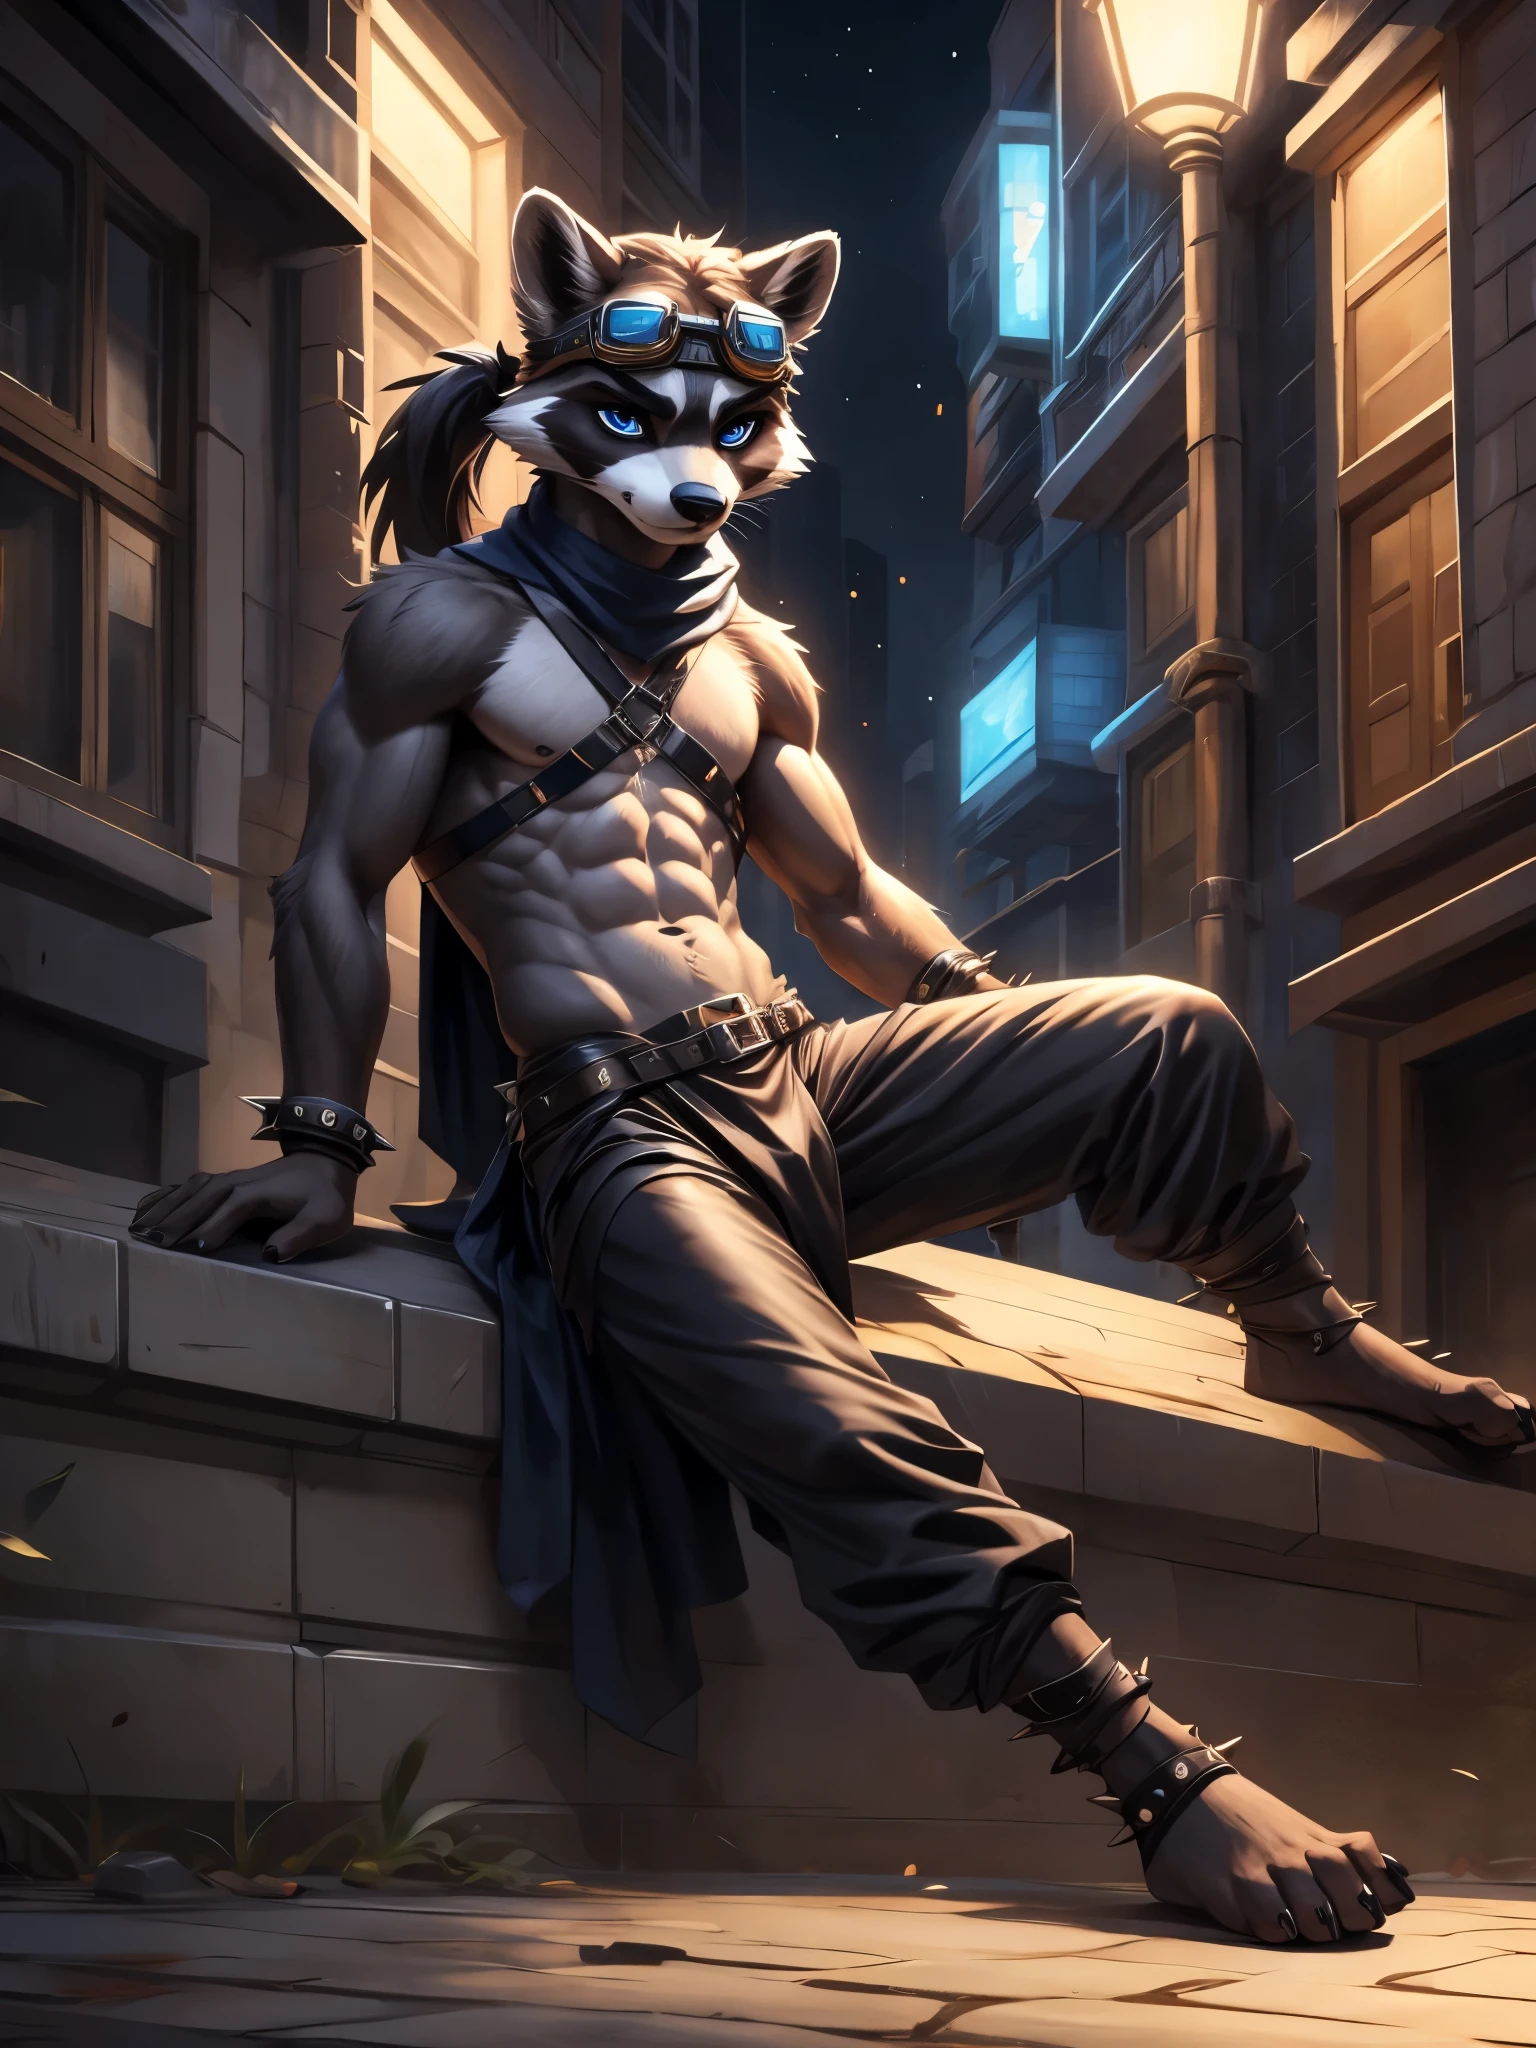 no lighting, deep shadow, dynamic angle, Solo, teen furry, furry, teen, raccoon, grey body, long brown spiked_ponytail, Detailed body fur, long blue scarf, leather_harness, blue_loincloth, goggles, masterpiece, gray body, Detailed face, big eyebrows, blue eyes, detailed eyes, No muscles, Detailed hands, Flat body, Skinny, Detailed paws, metal cuffs on wrists, metal cuffs on ankles, black baggy pants, no shirt, street, night, no underwear, laying, bored